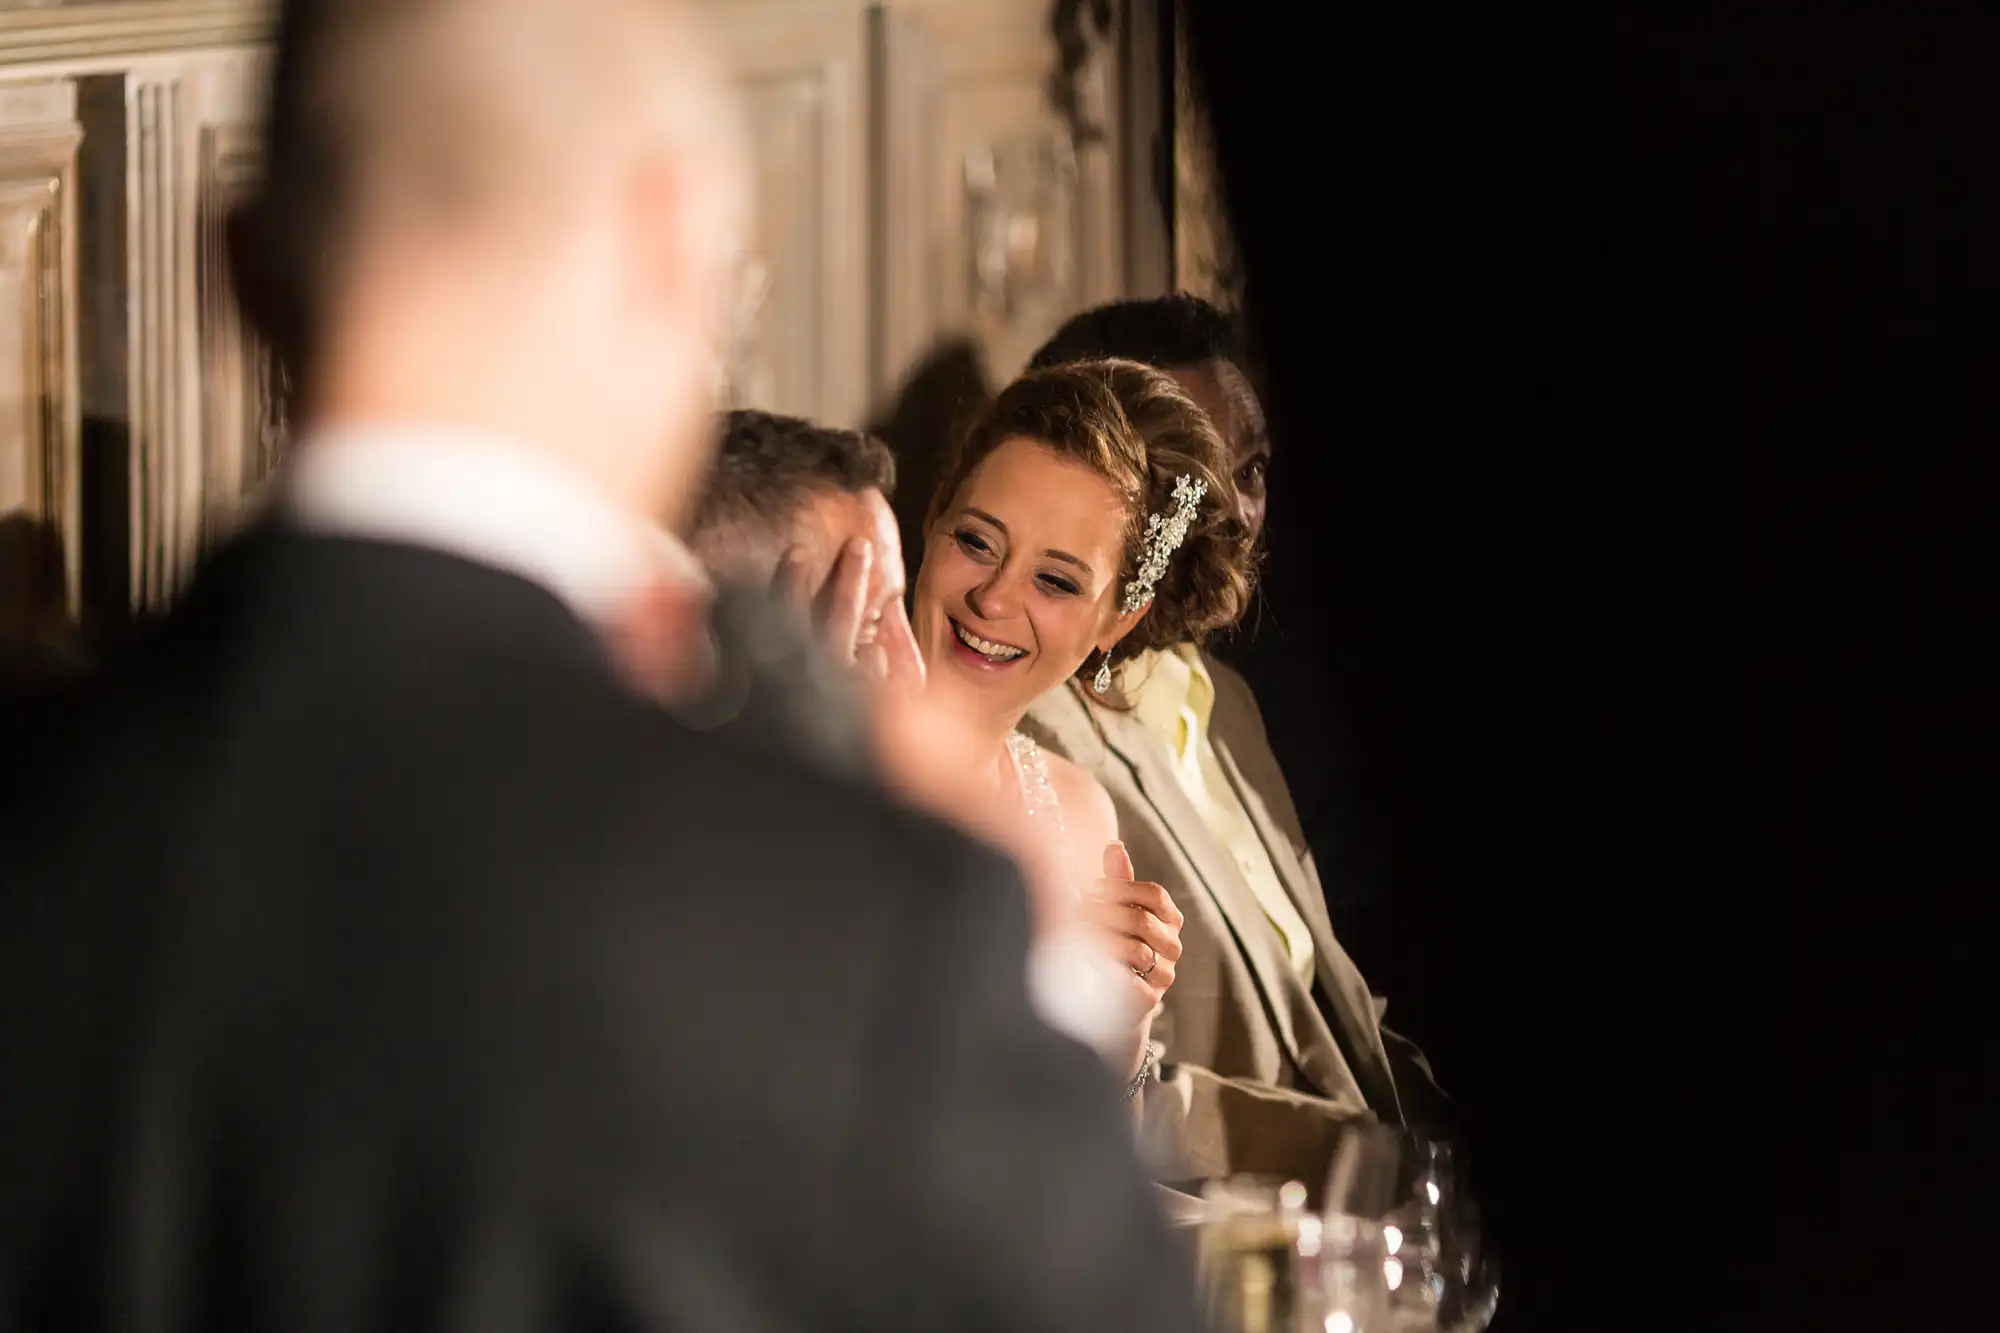 A bride joyfully looks at a groom during a wedding reception, both partially visible and warmly lit, with a focus on the bride's smiling face.